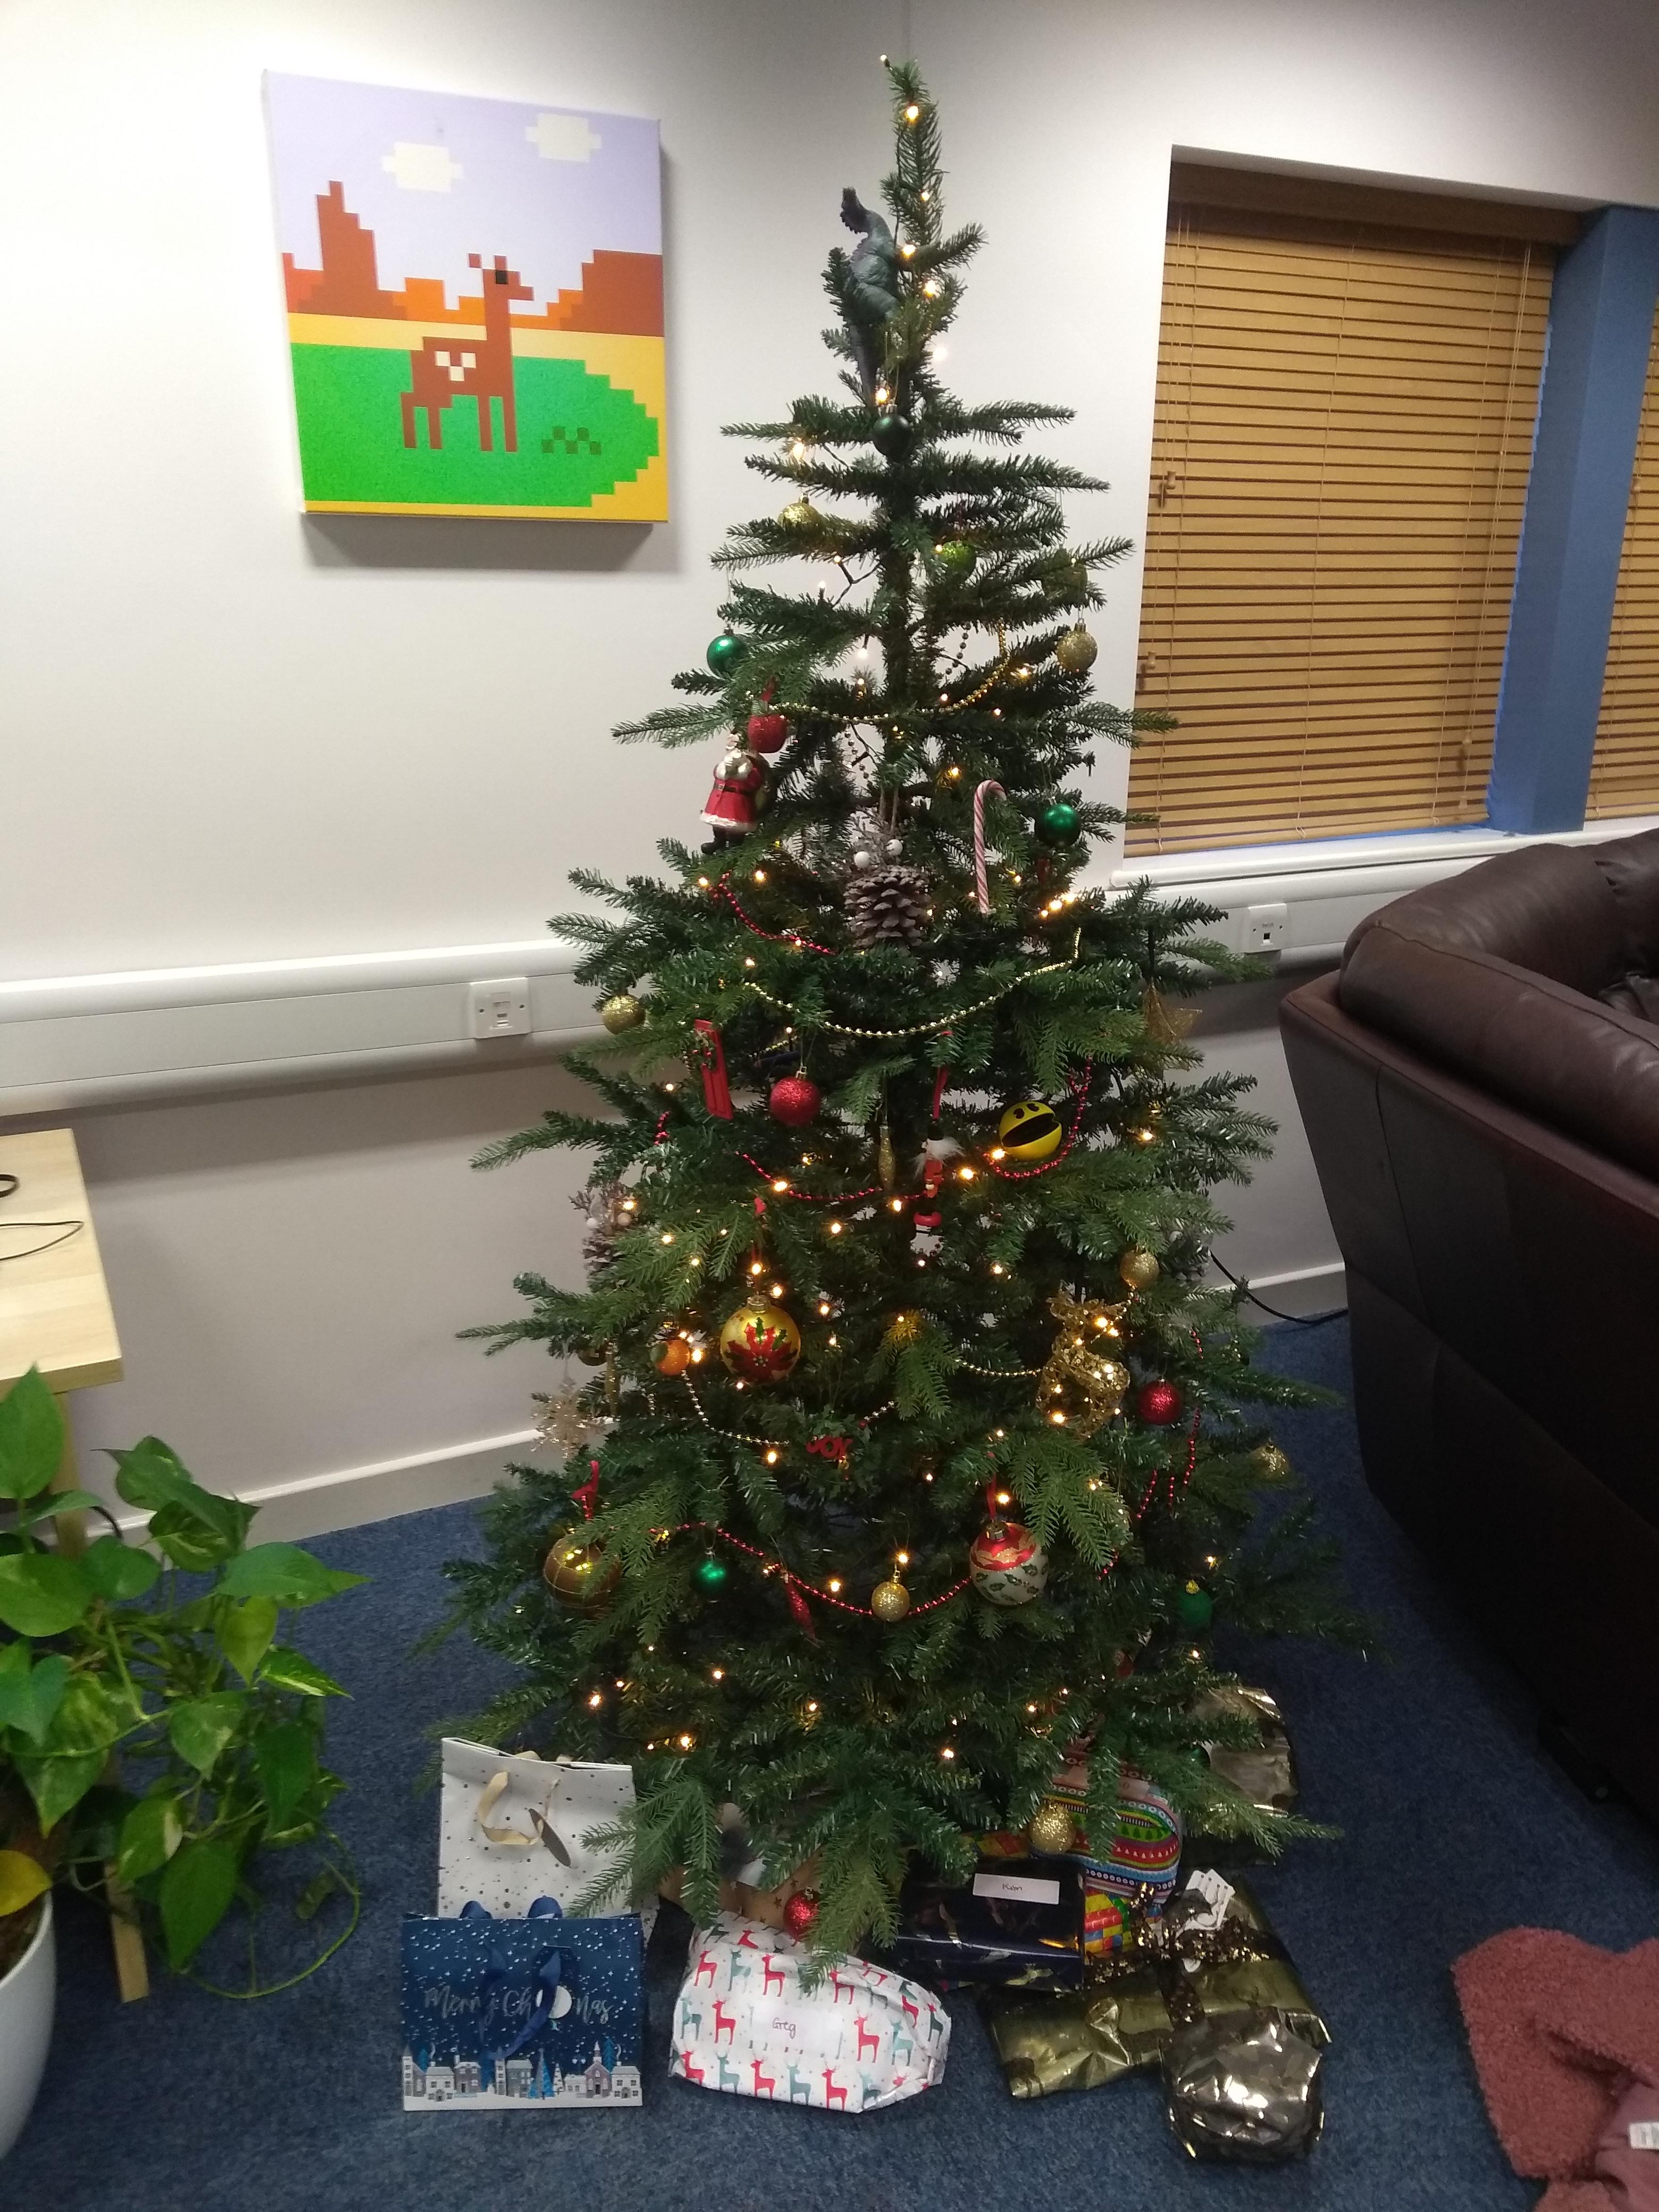 An artificial tree decorated with red and gold decorations and fairy lights. There are various wrapped gifts underneath, a dinosaur near the top of the tree and a Pacman hidden in the branches. It's placed in an office with white walls and a blue carpet.